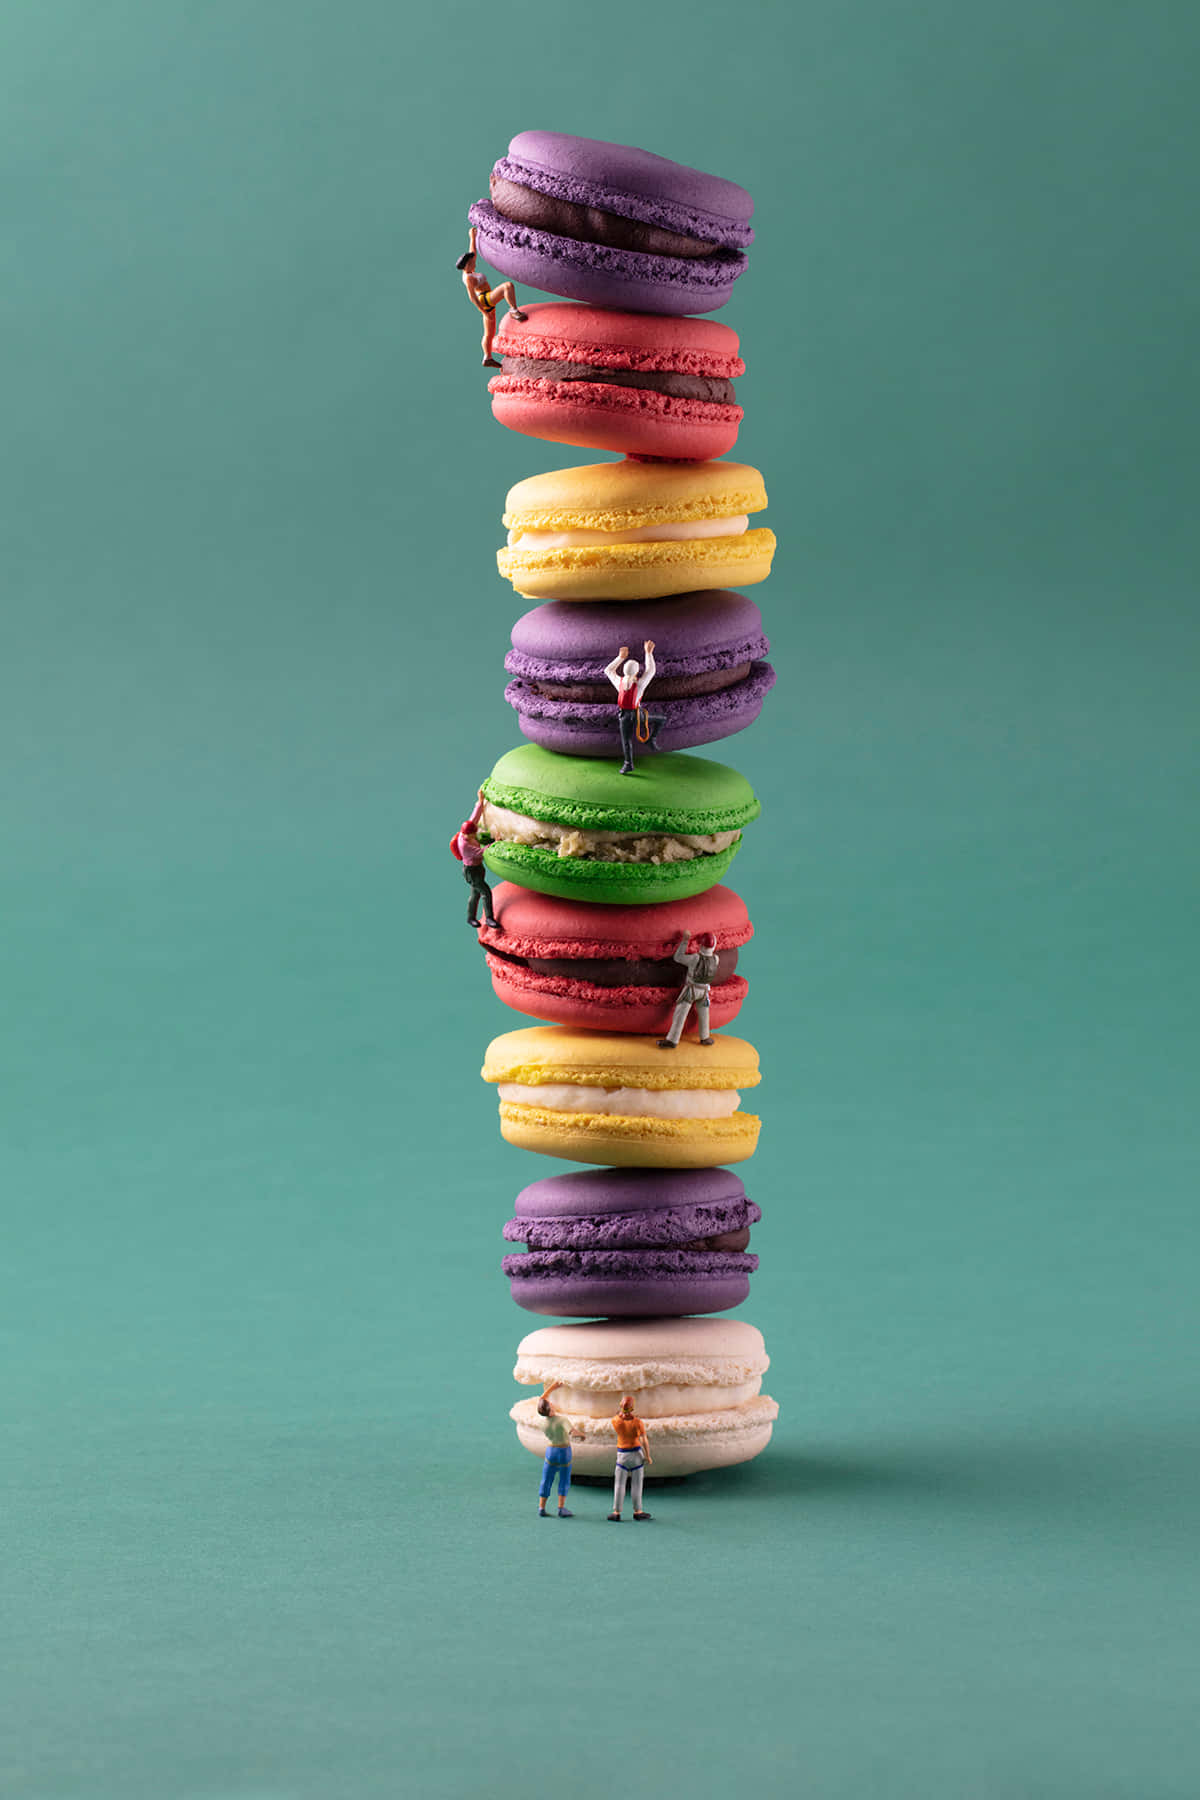 Multicolored Macaron Stacked Like A Tower Wallpaper